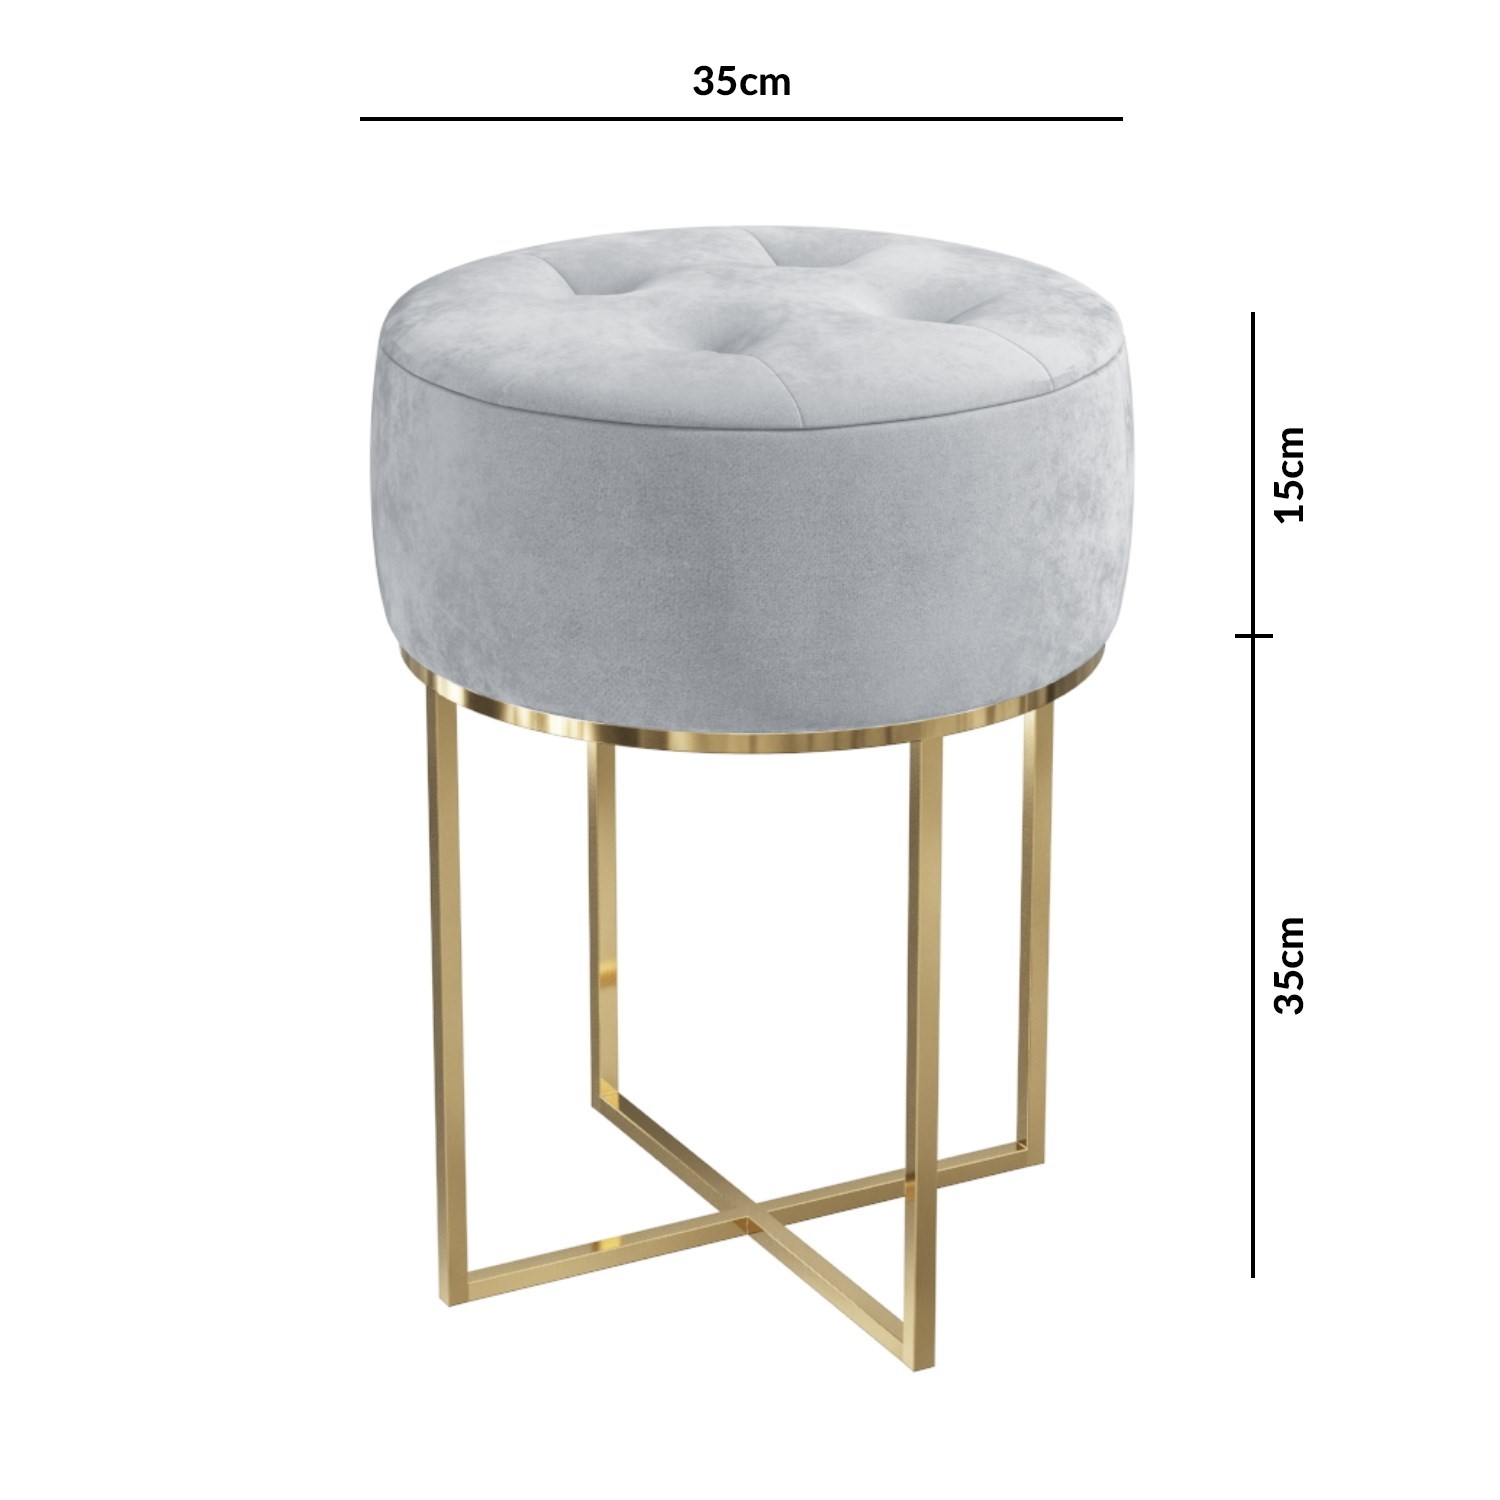 DOWNTON INTERIORS Round Grey Matte Velvet Padded Dressing Table Foot Stool with Gold Base Grey ST-GOLD-GREY Pink **Available in Blue Green and Red** 